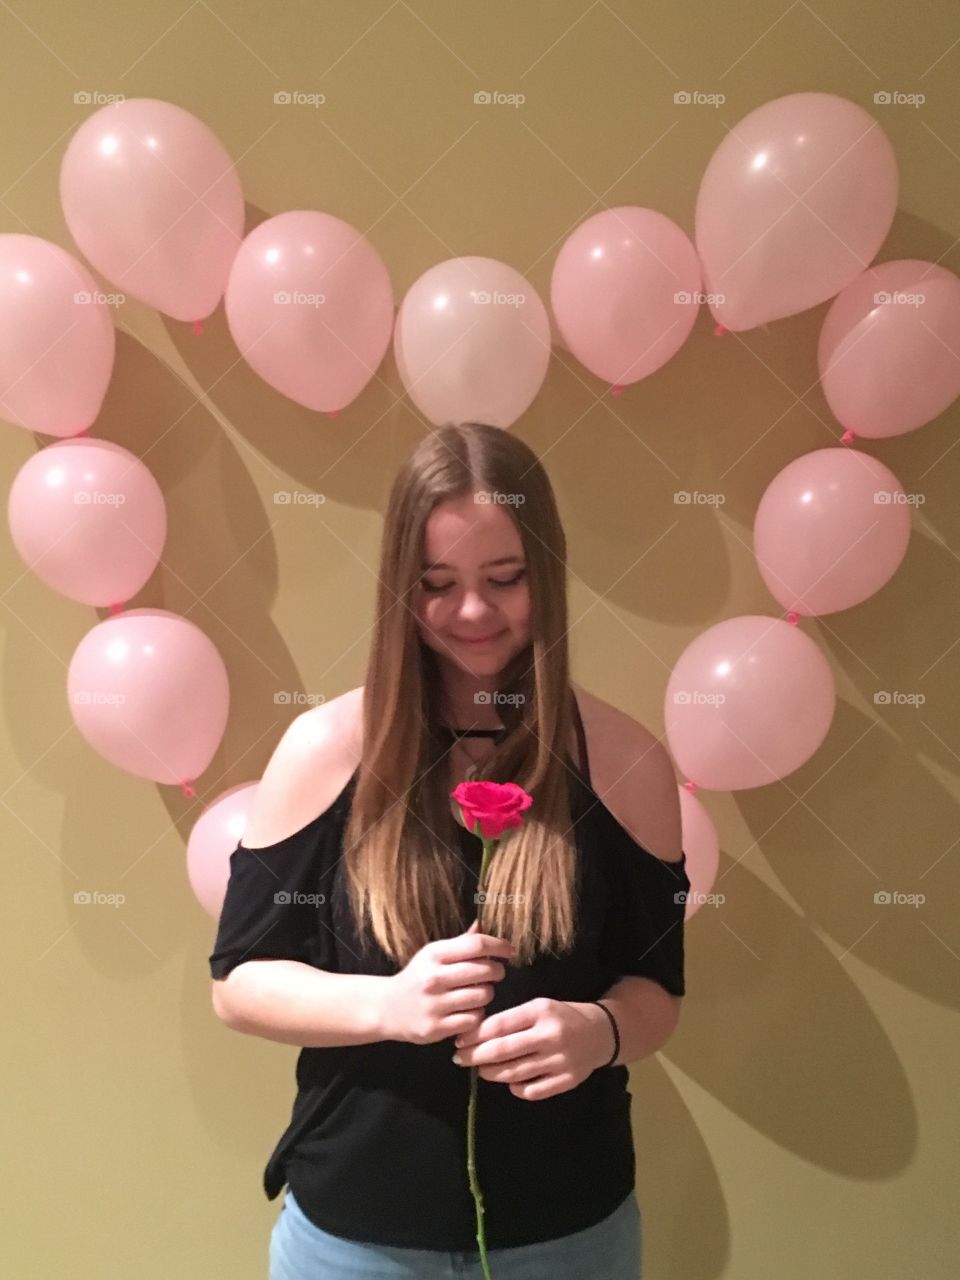 Beautiful girl looking at a rose with a heart balloon background